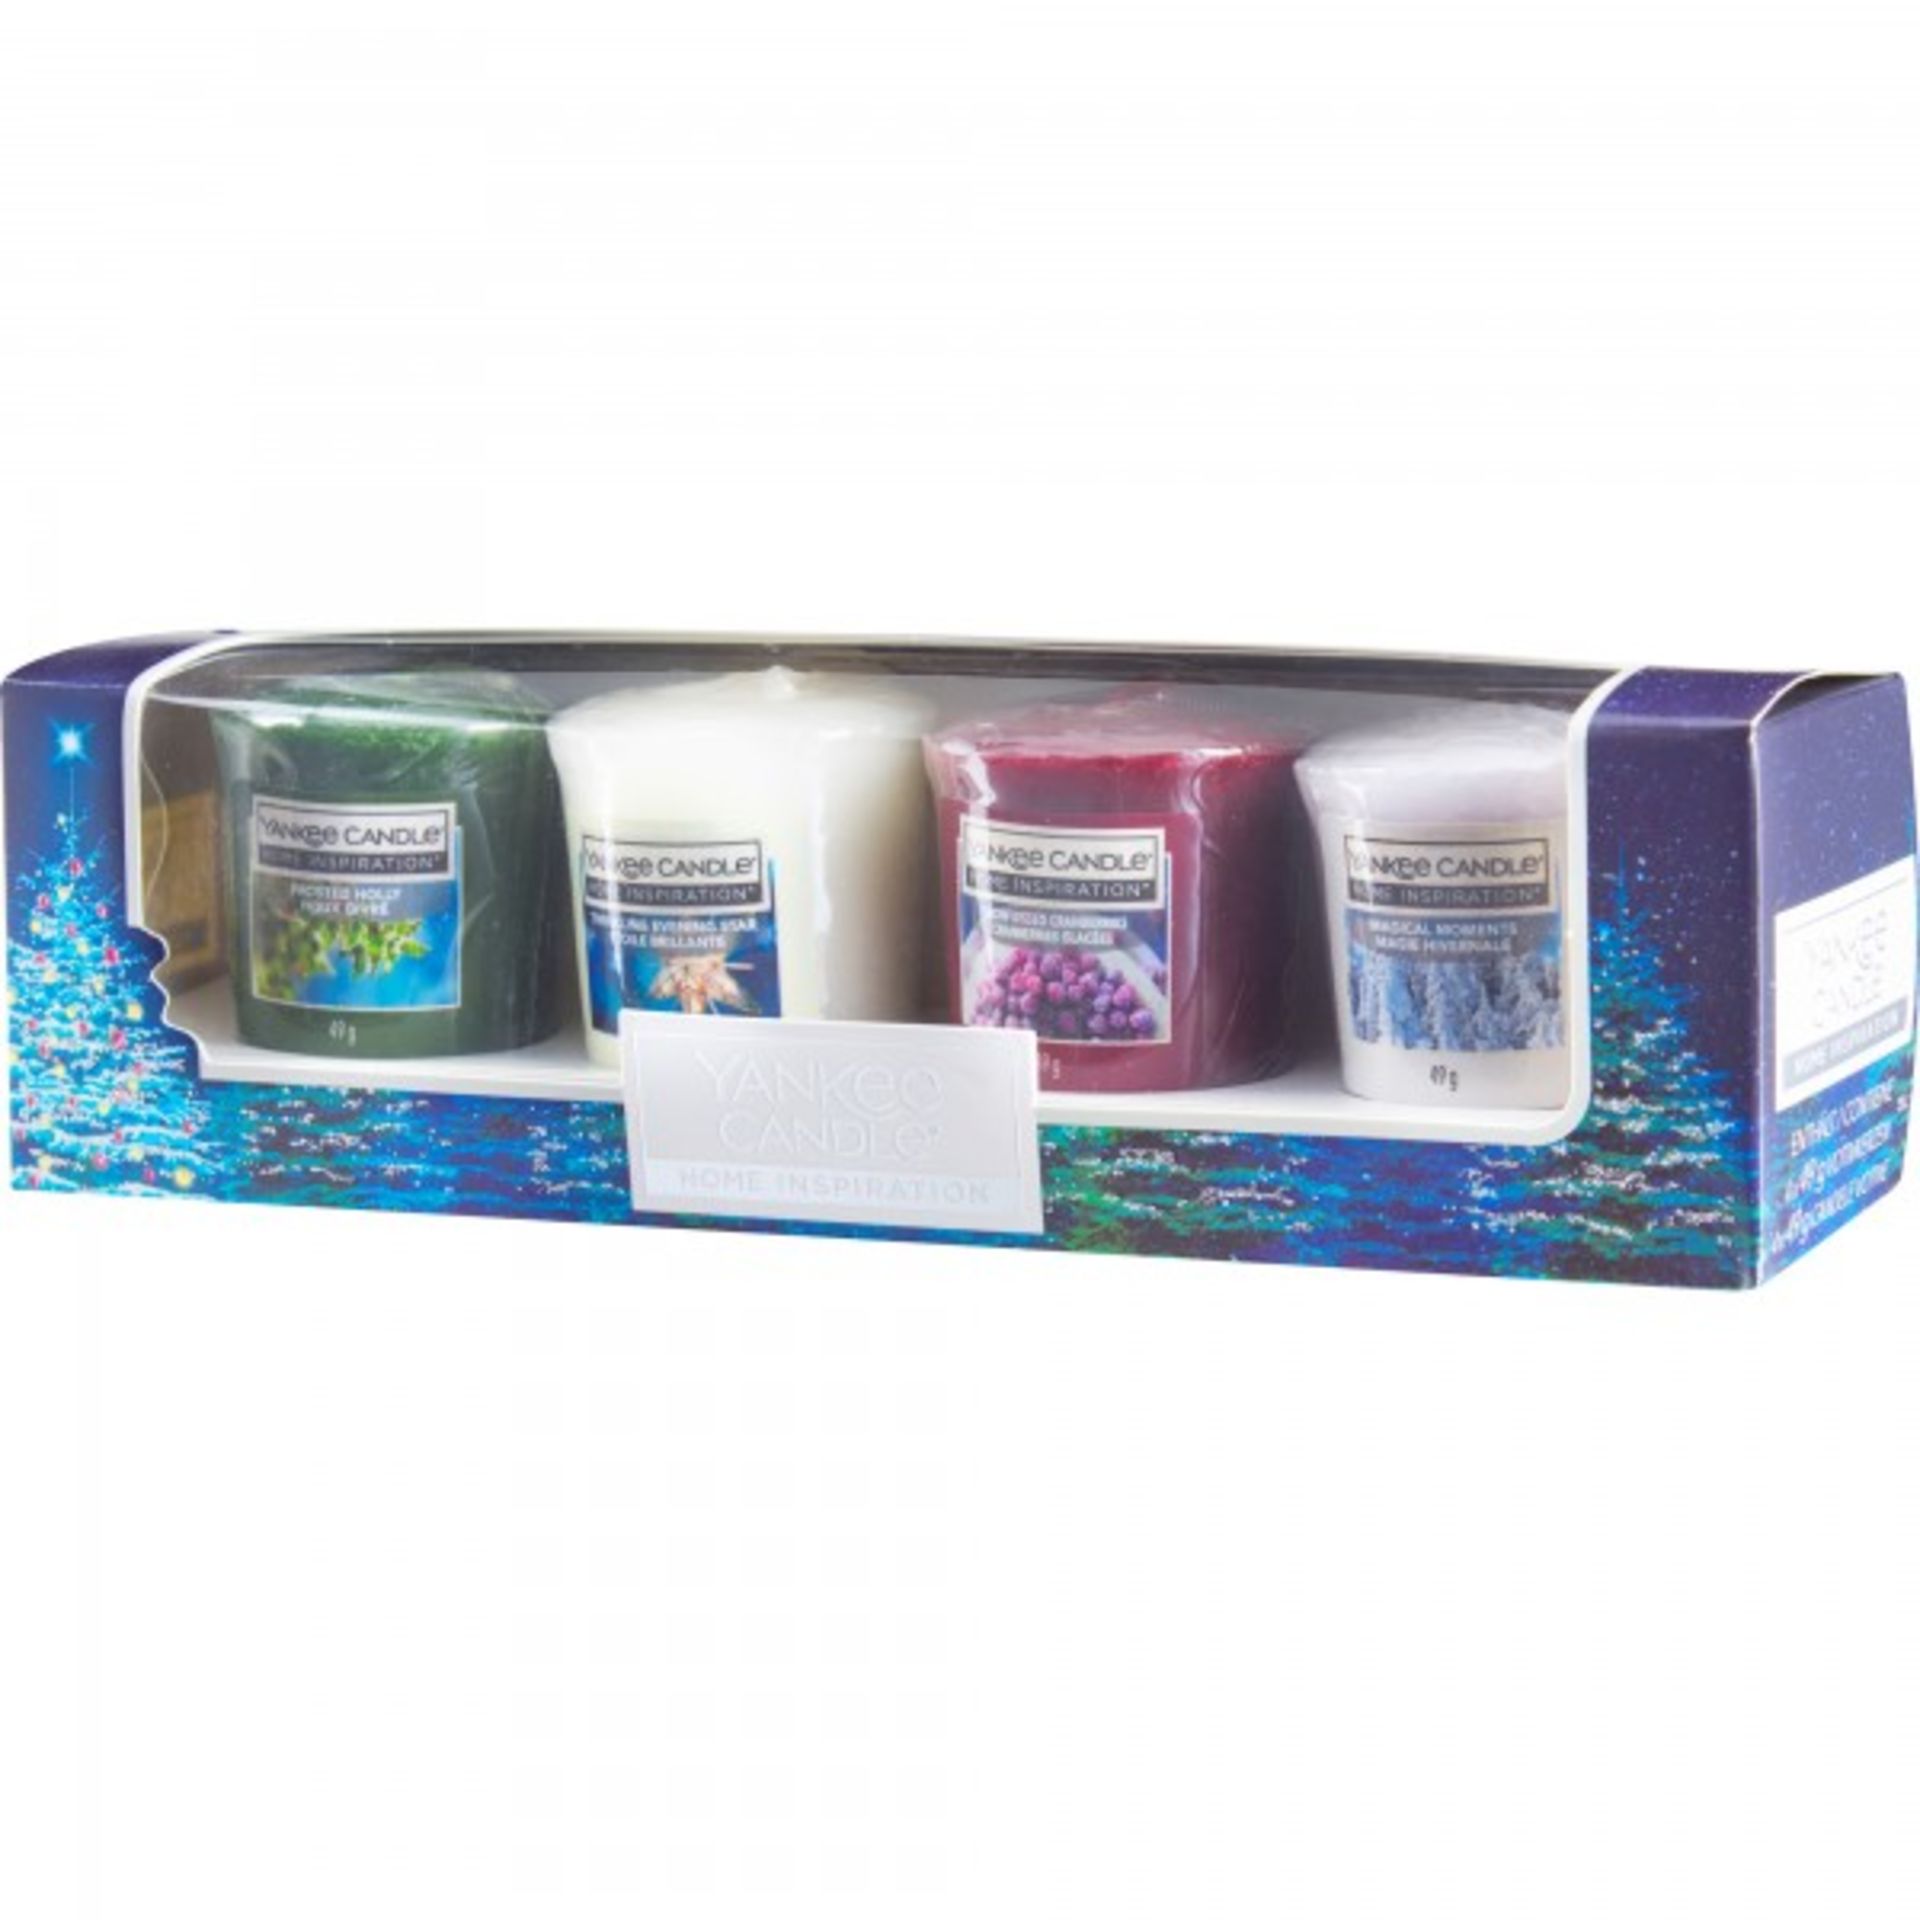 + VAT Brand New Four Piece Yankee Candle Gift Set - Item Is Available Approx 5 Working Days After - Image 2 of 2